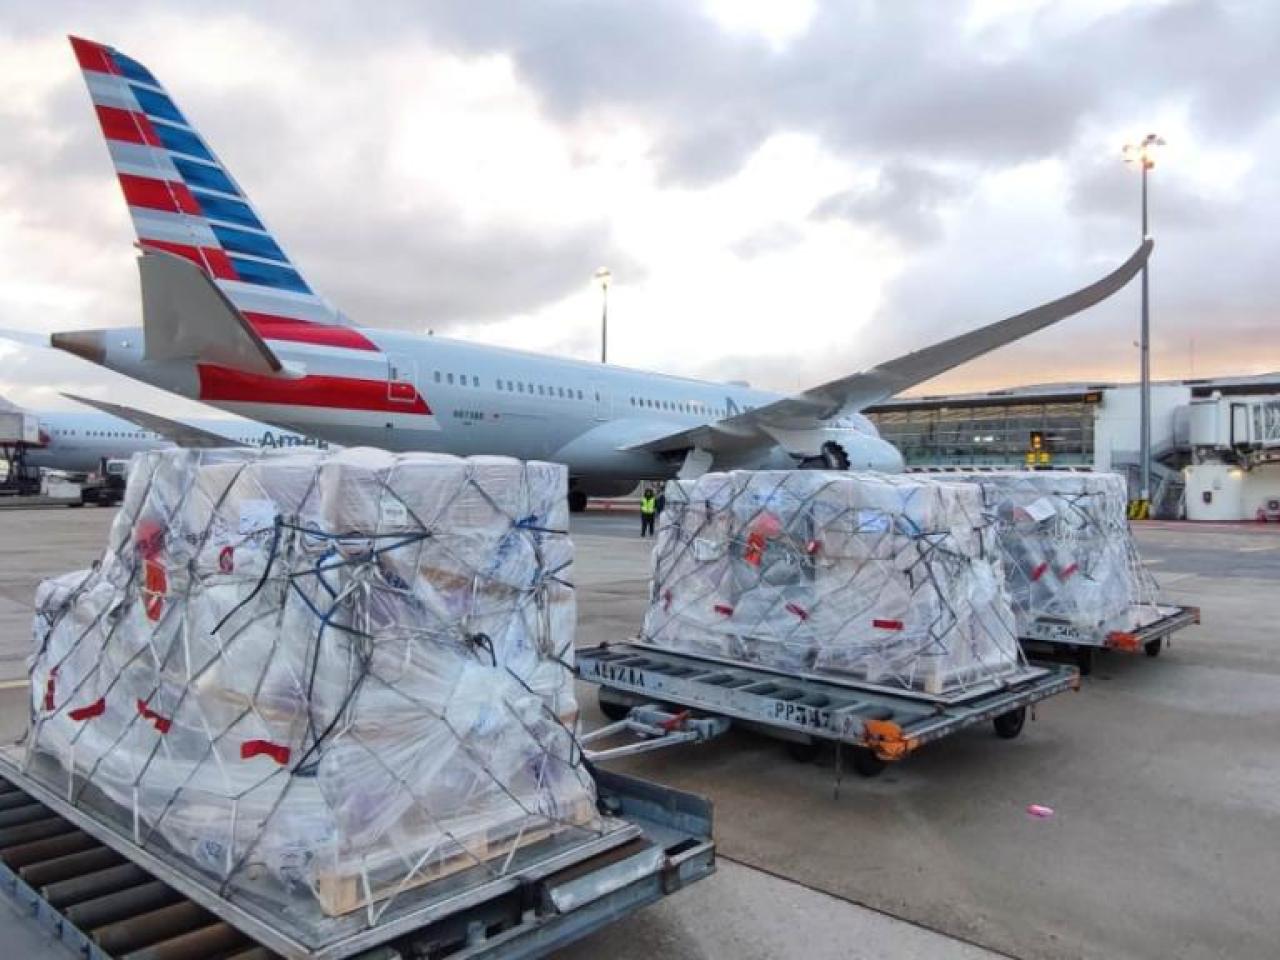 Pallets of cargo on a runway with two American Airlines planes behind them.